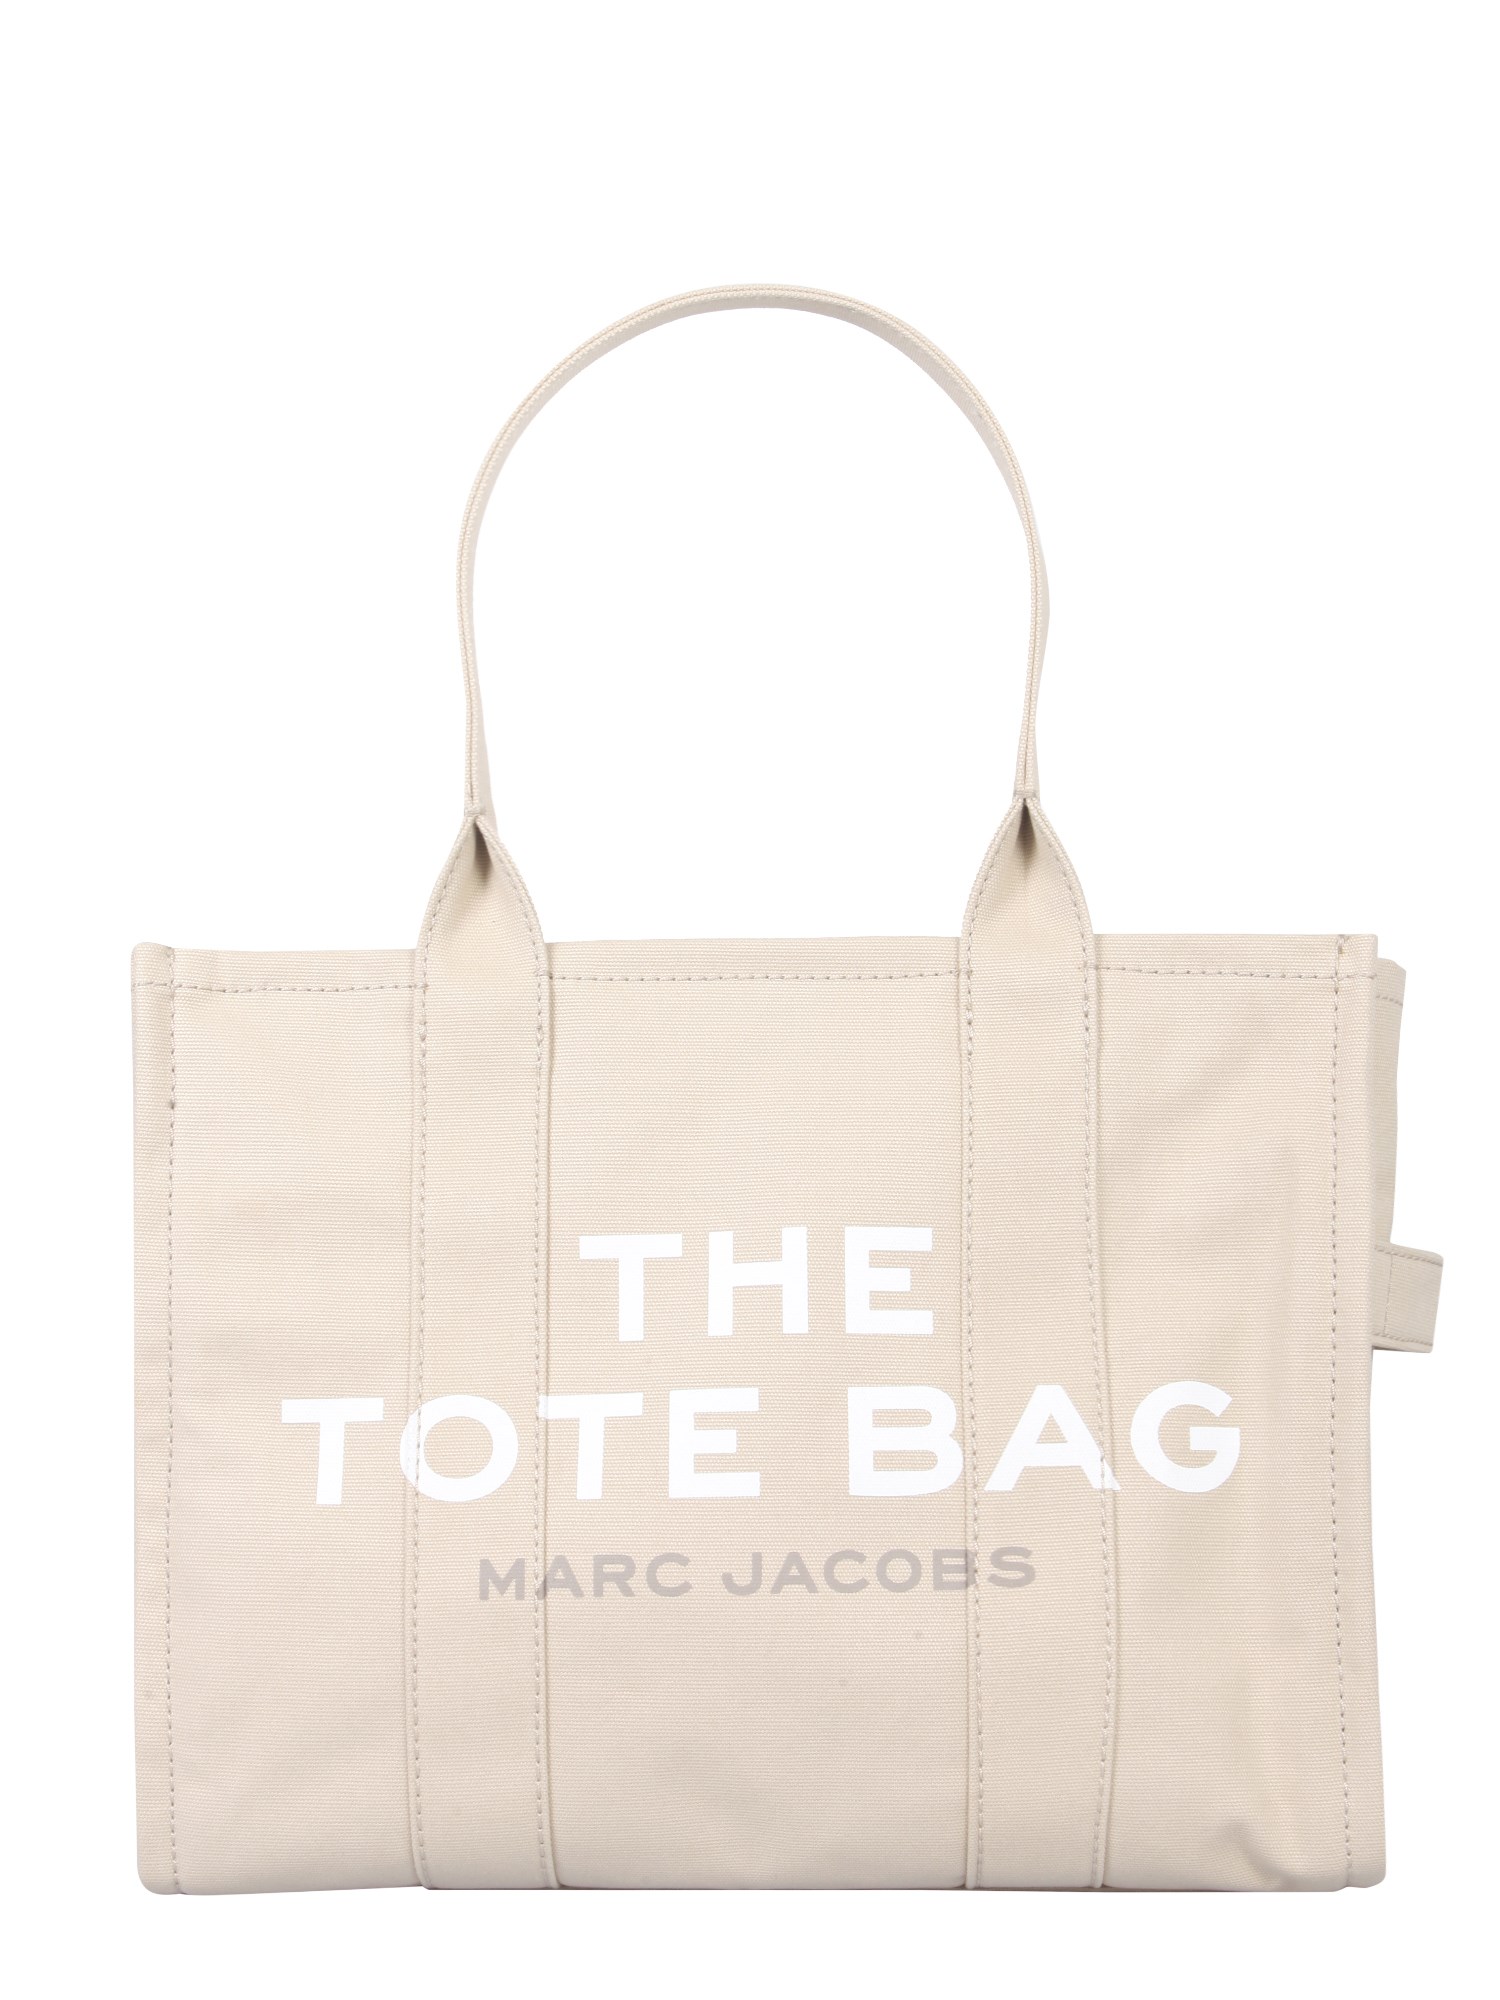 Marc Jacobs marc jacobs "the tote" large bag